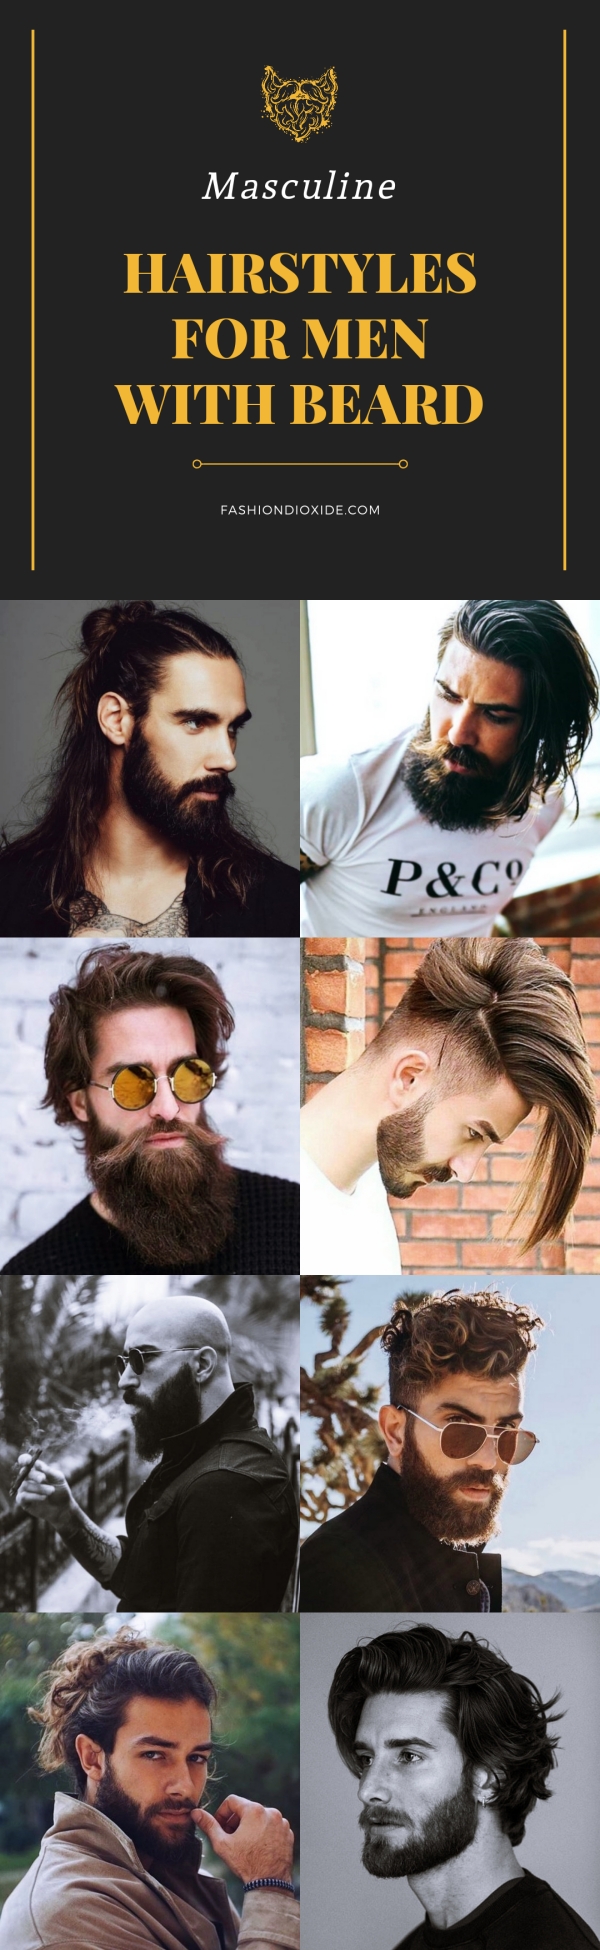 Masculine Hairstyles for Men with Beard